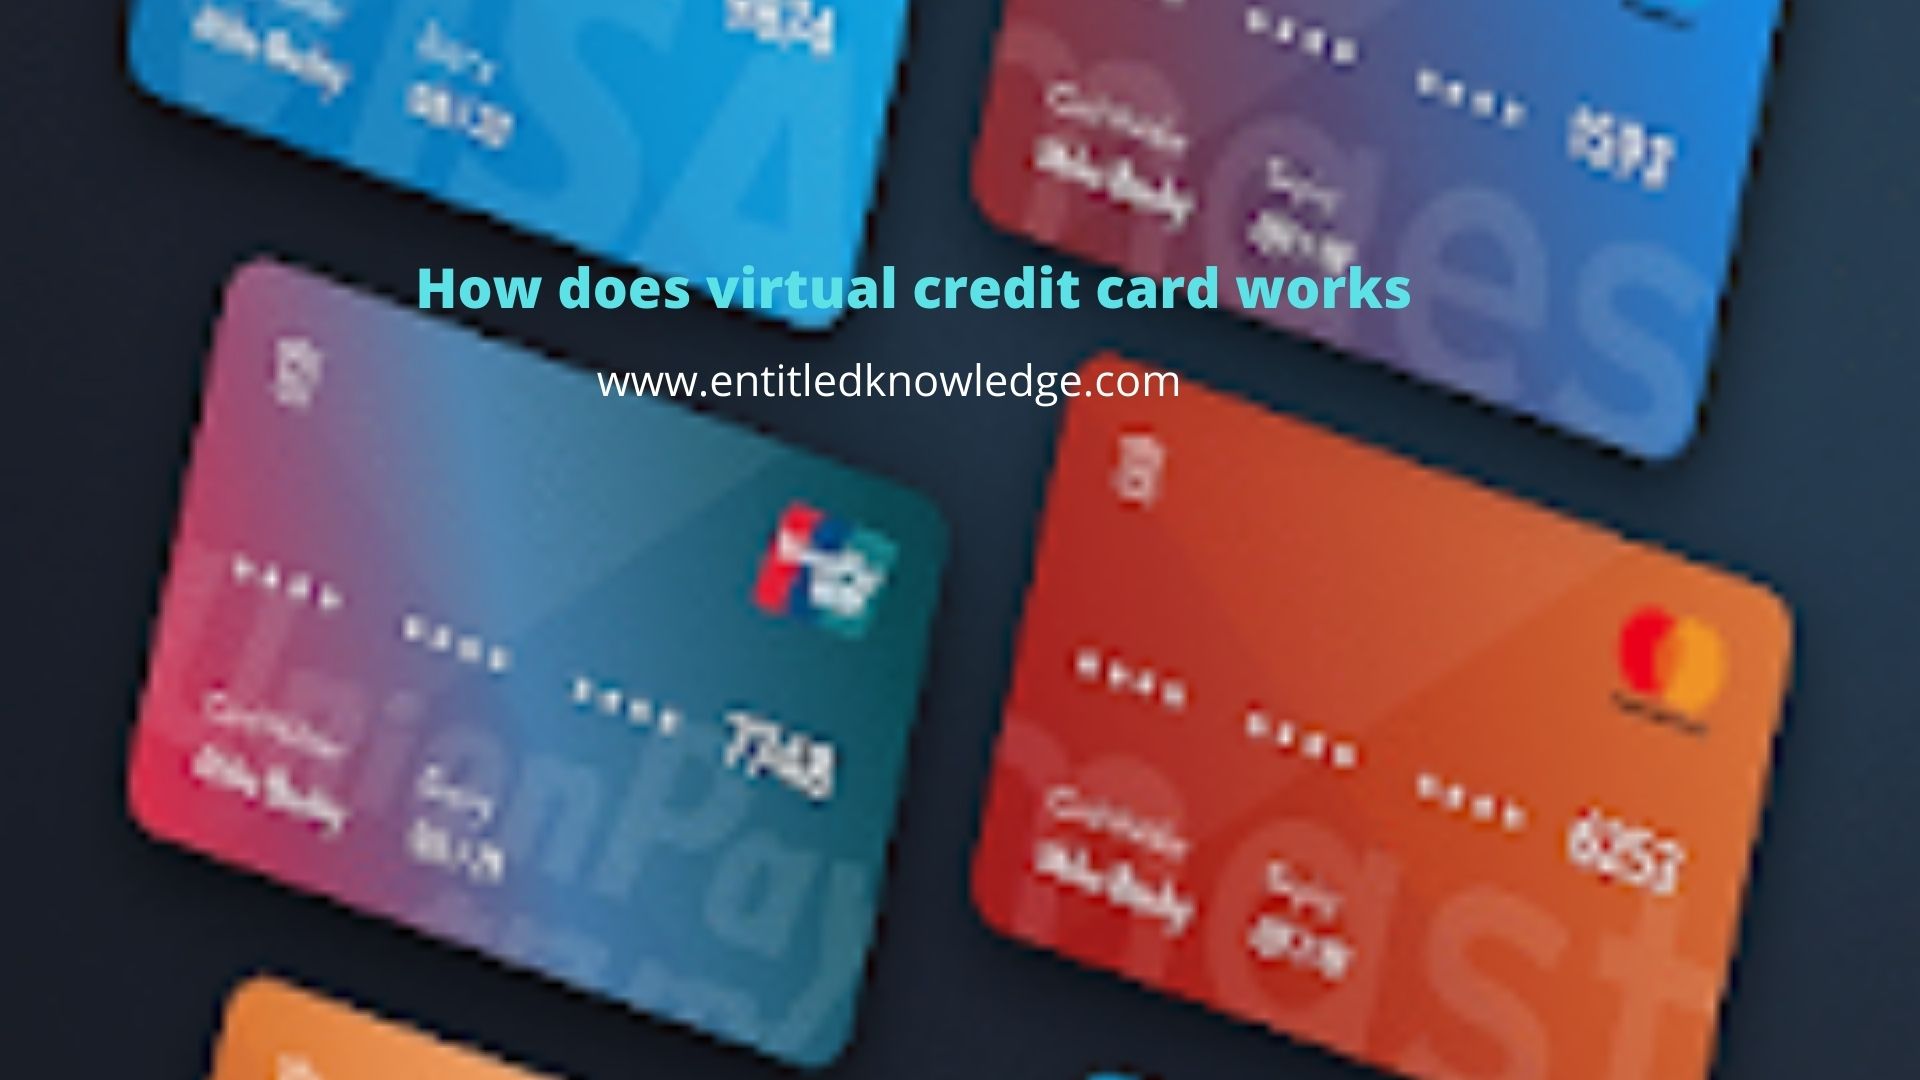 How does Virtual credit Card works and how do we get one?